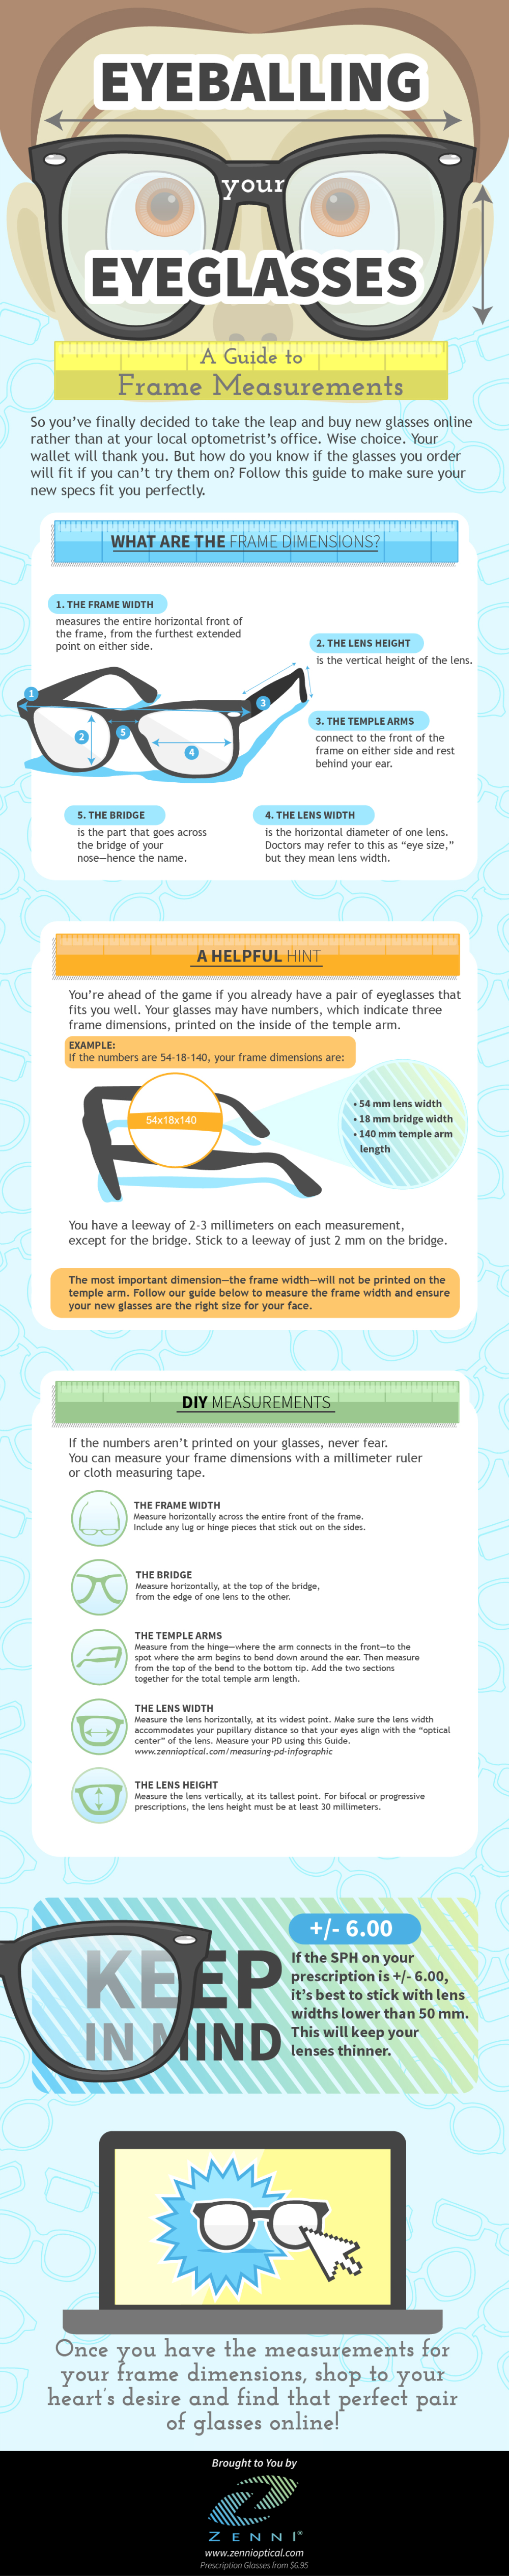 How To Measure Your Eyeglass Frame Size